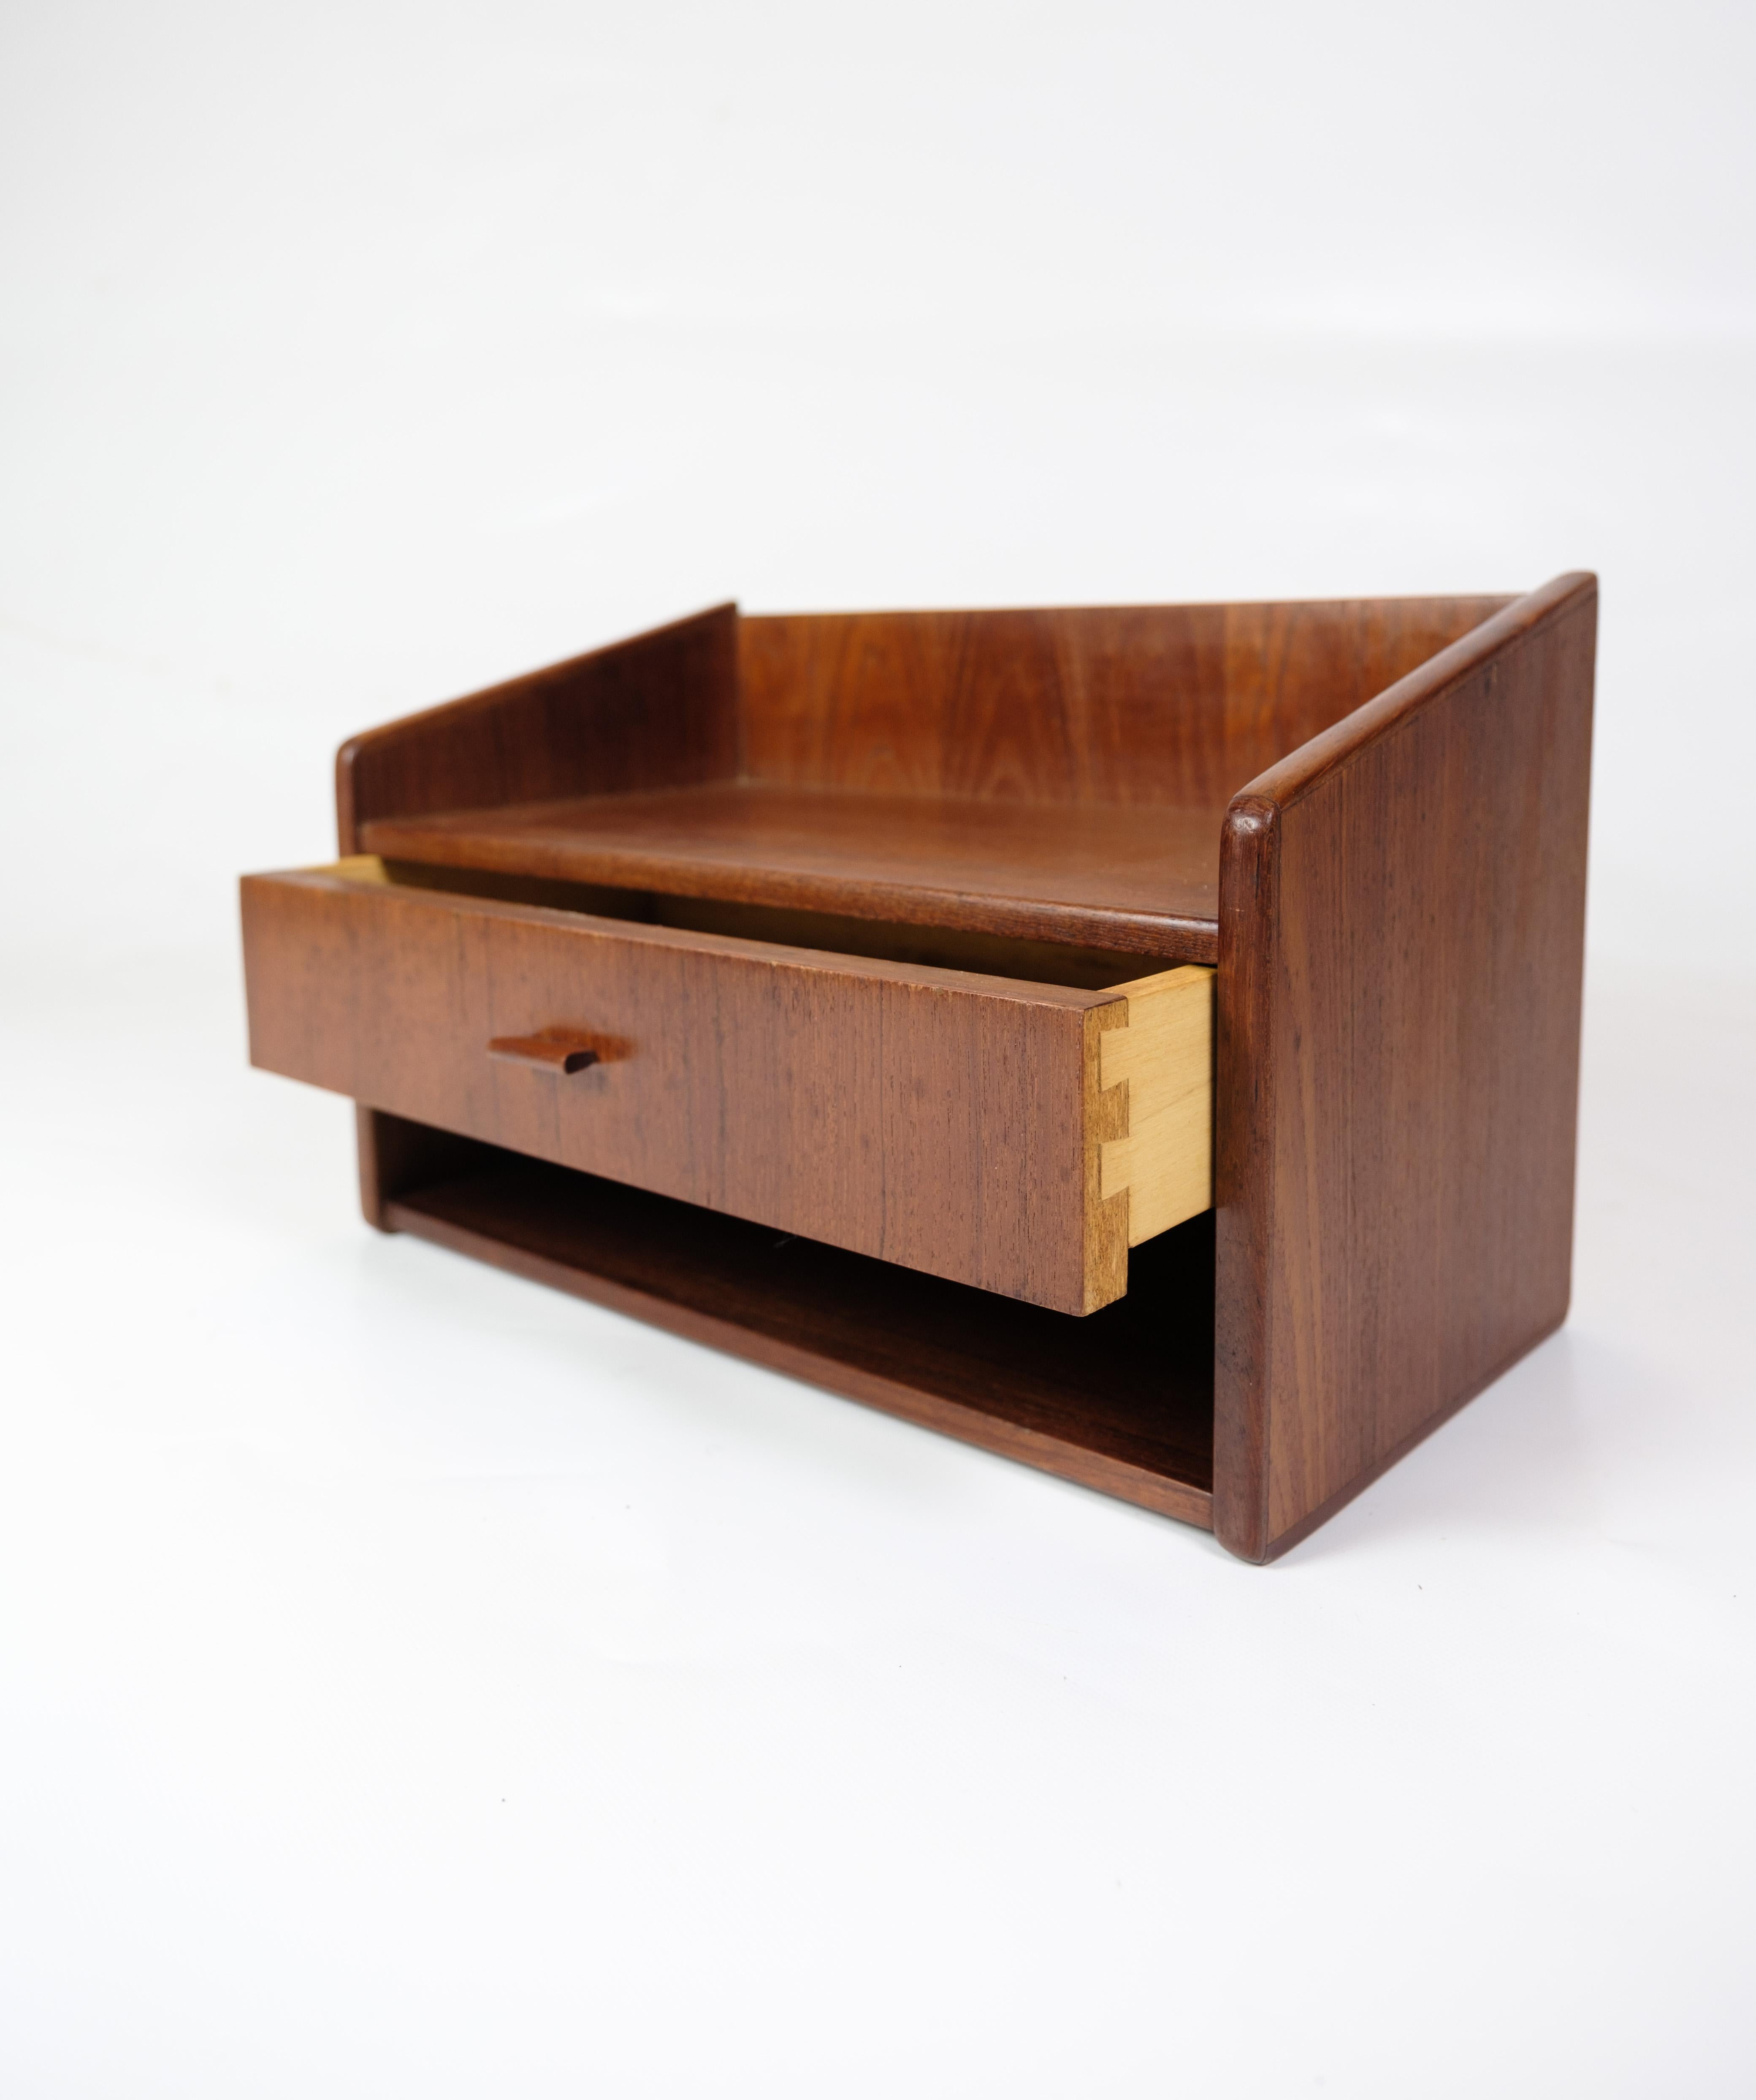 Danish Teak Wall-Mounted Nightstands with Drawers from 1960s. For Sale